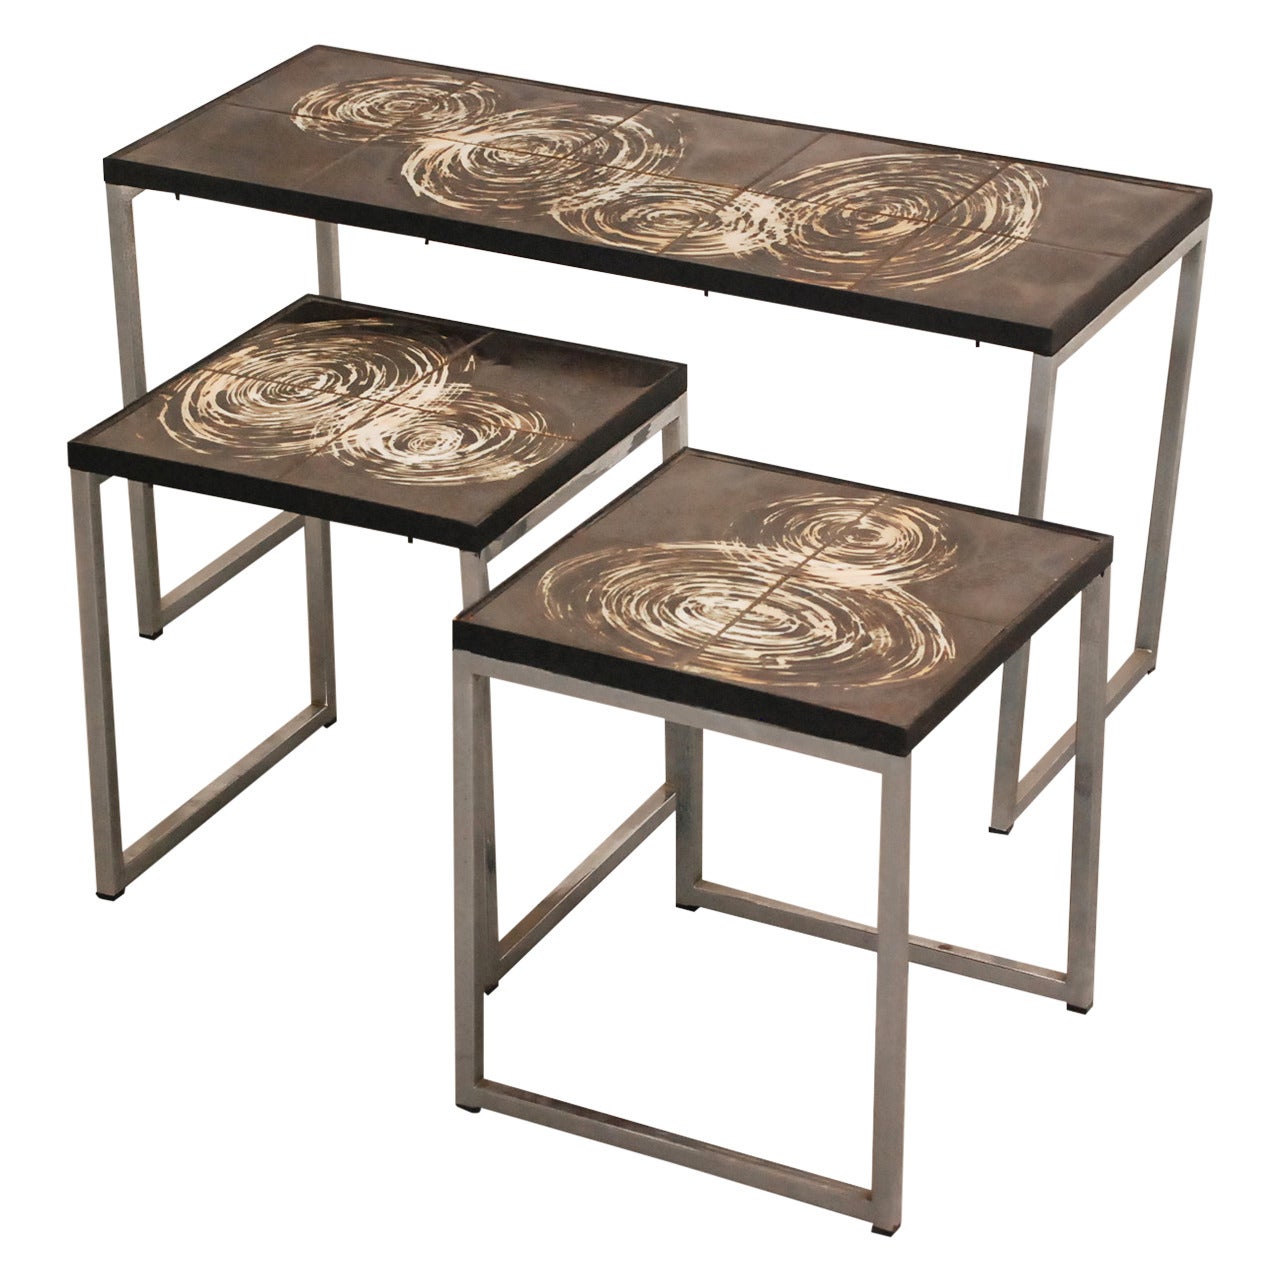 Belarti Coffee Table with Two Side Tables with Hand-Painted Tiles For Sale